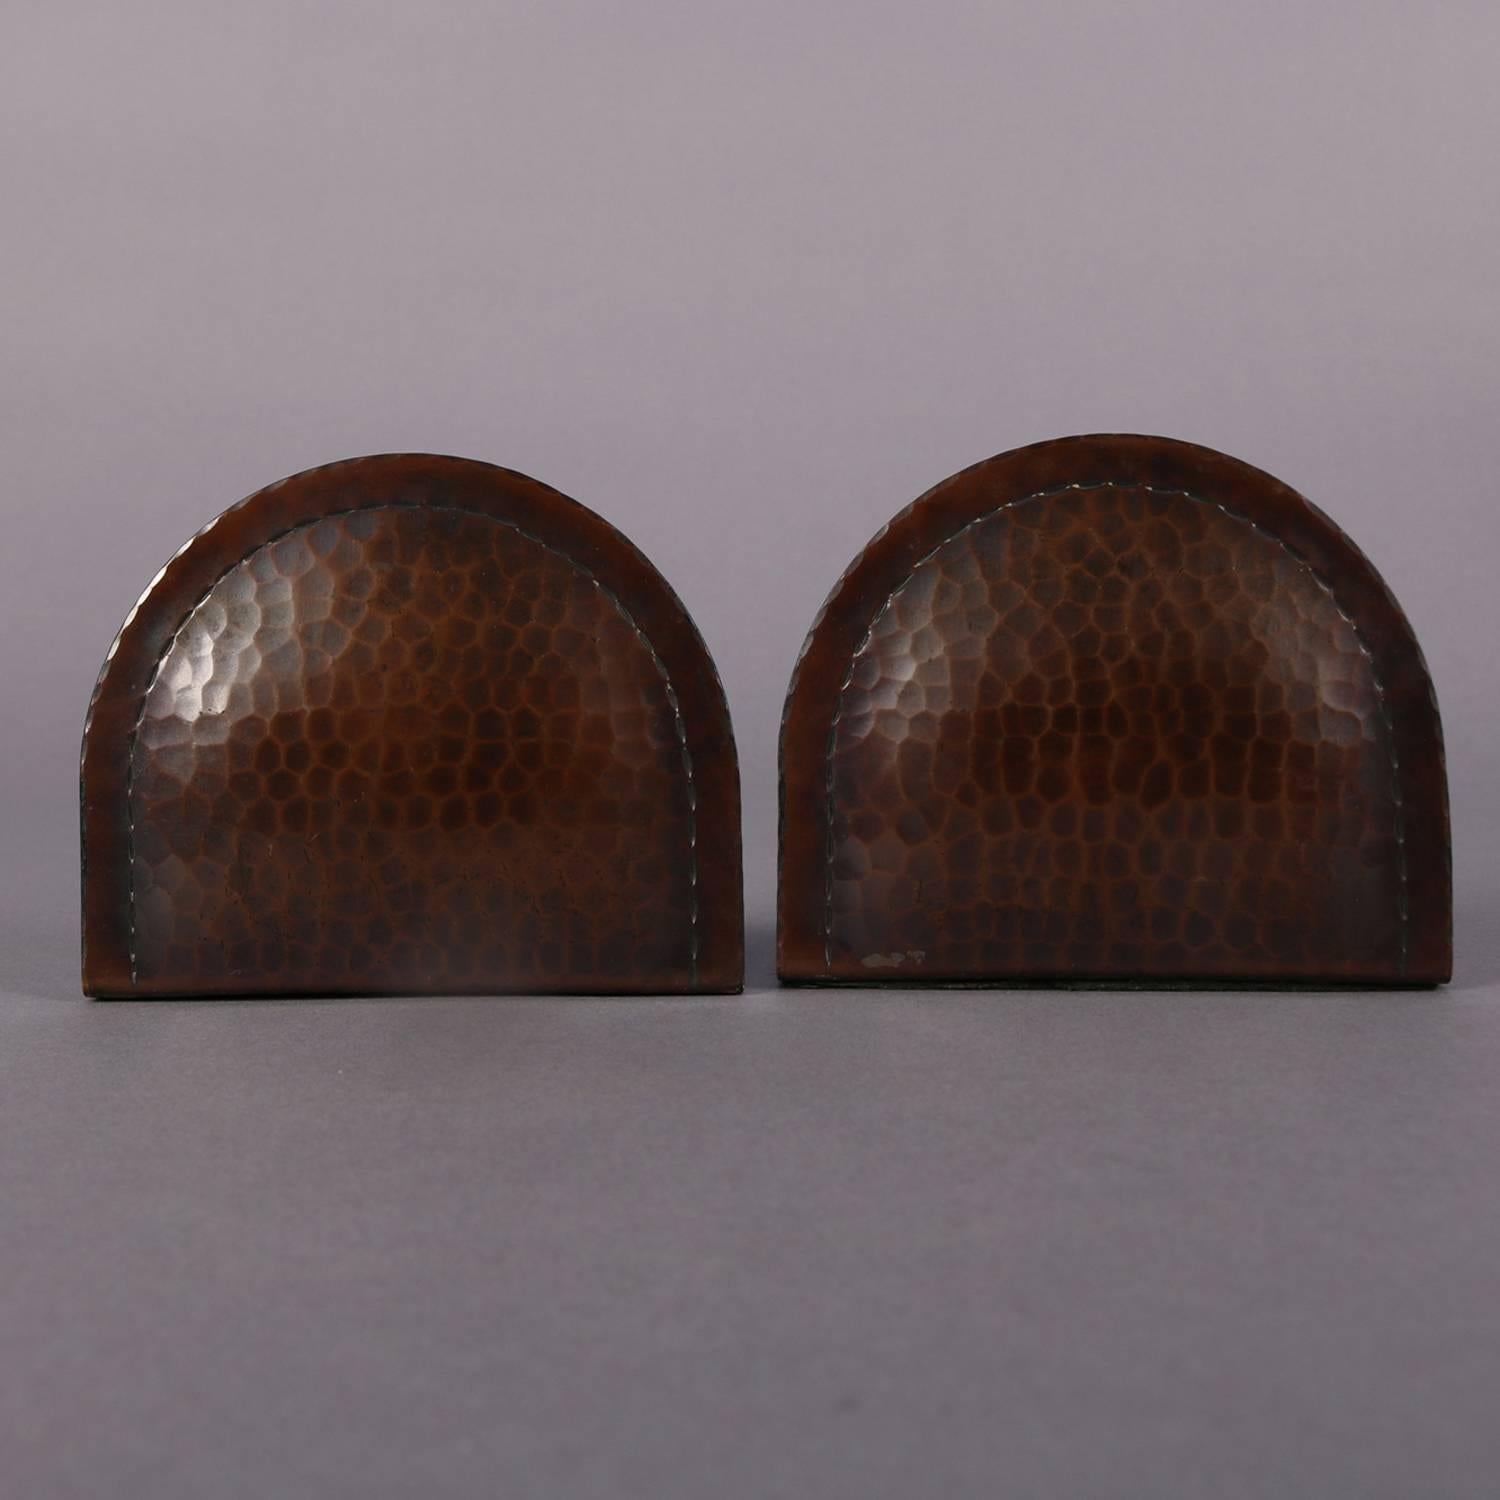 Pair of Arts & Crafts hand-hammered coppered metal bookends in arched convex form by Roycroft, en verso signed, circa 1910.

Measures: 3.5